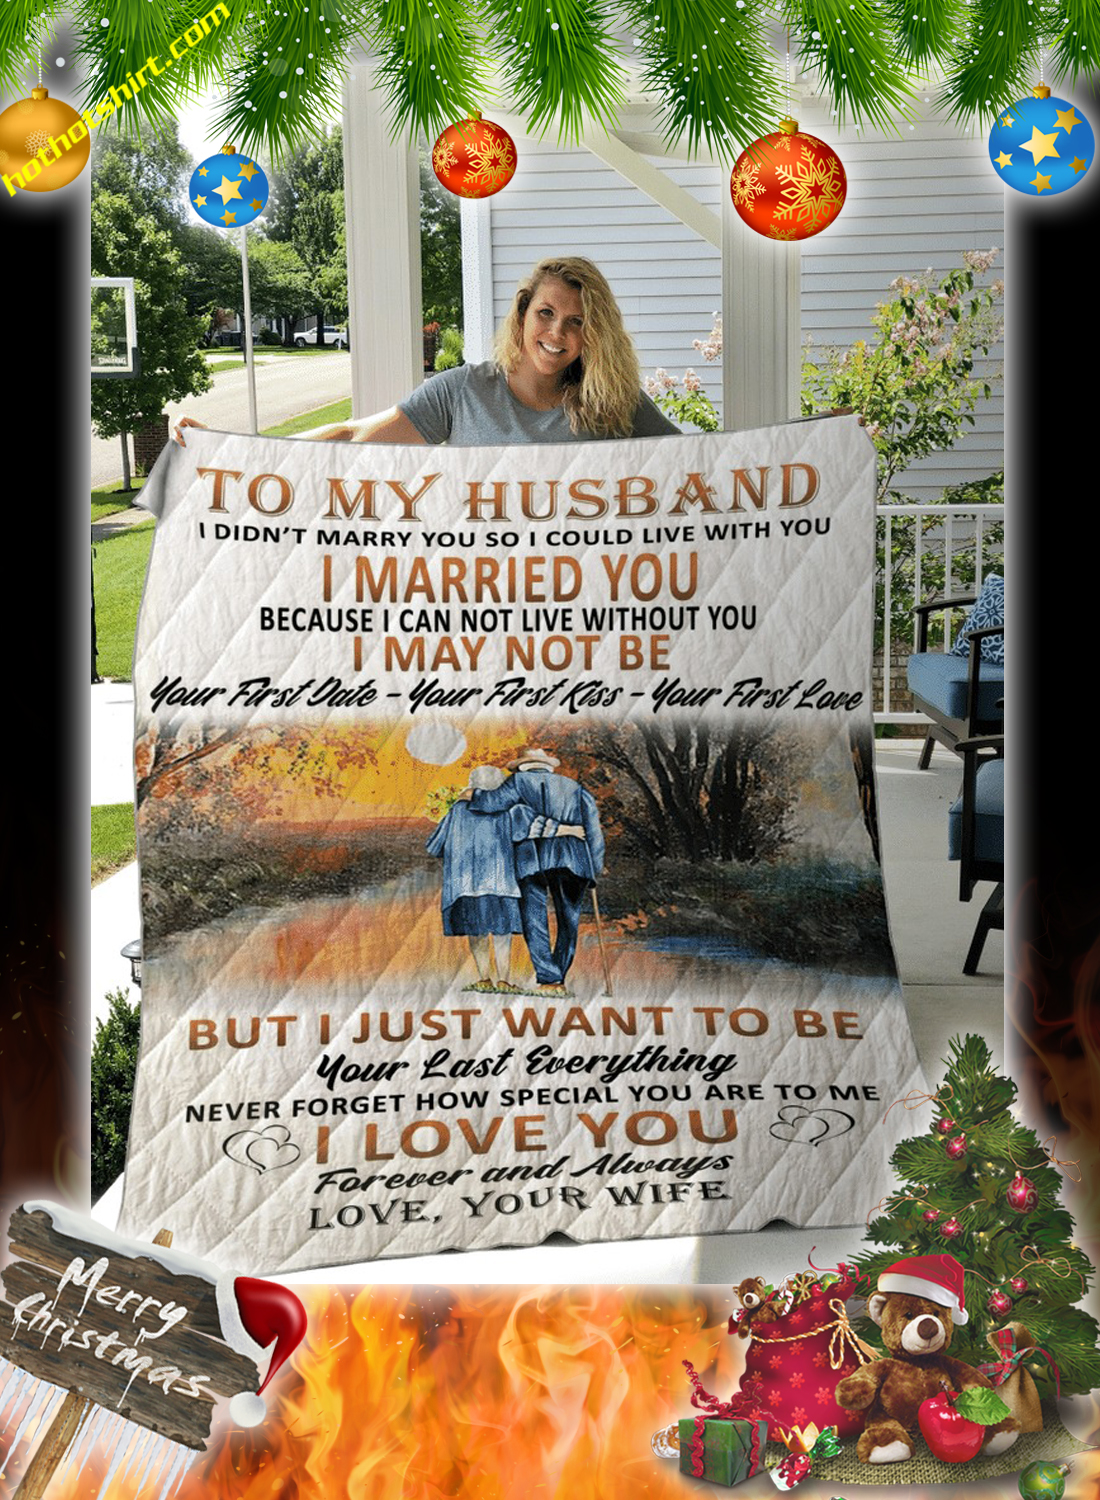 To my husband i didn't marry you so i could live with you your wife quilt